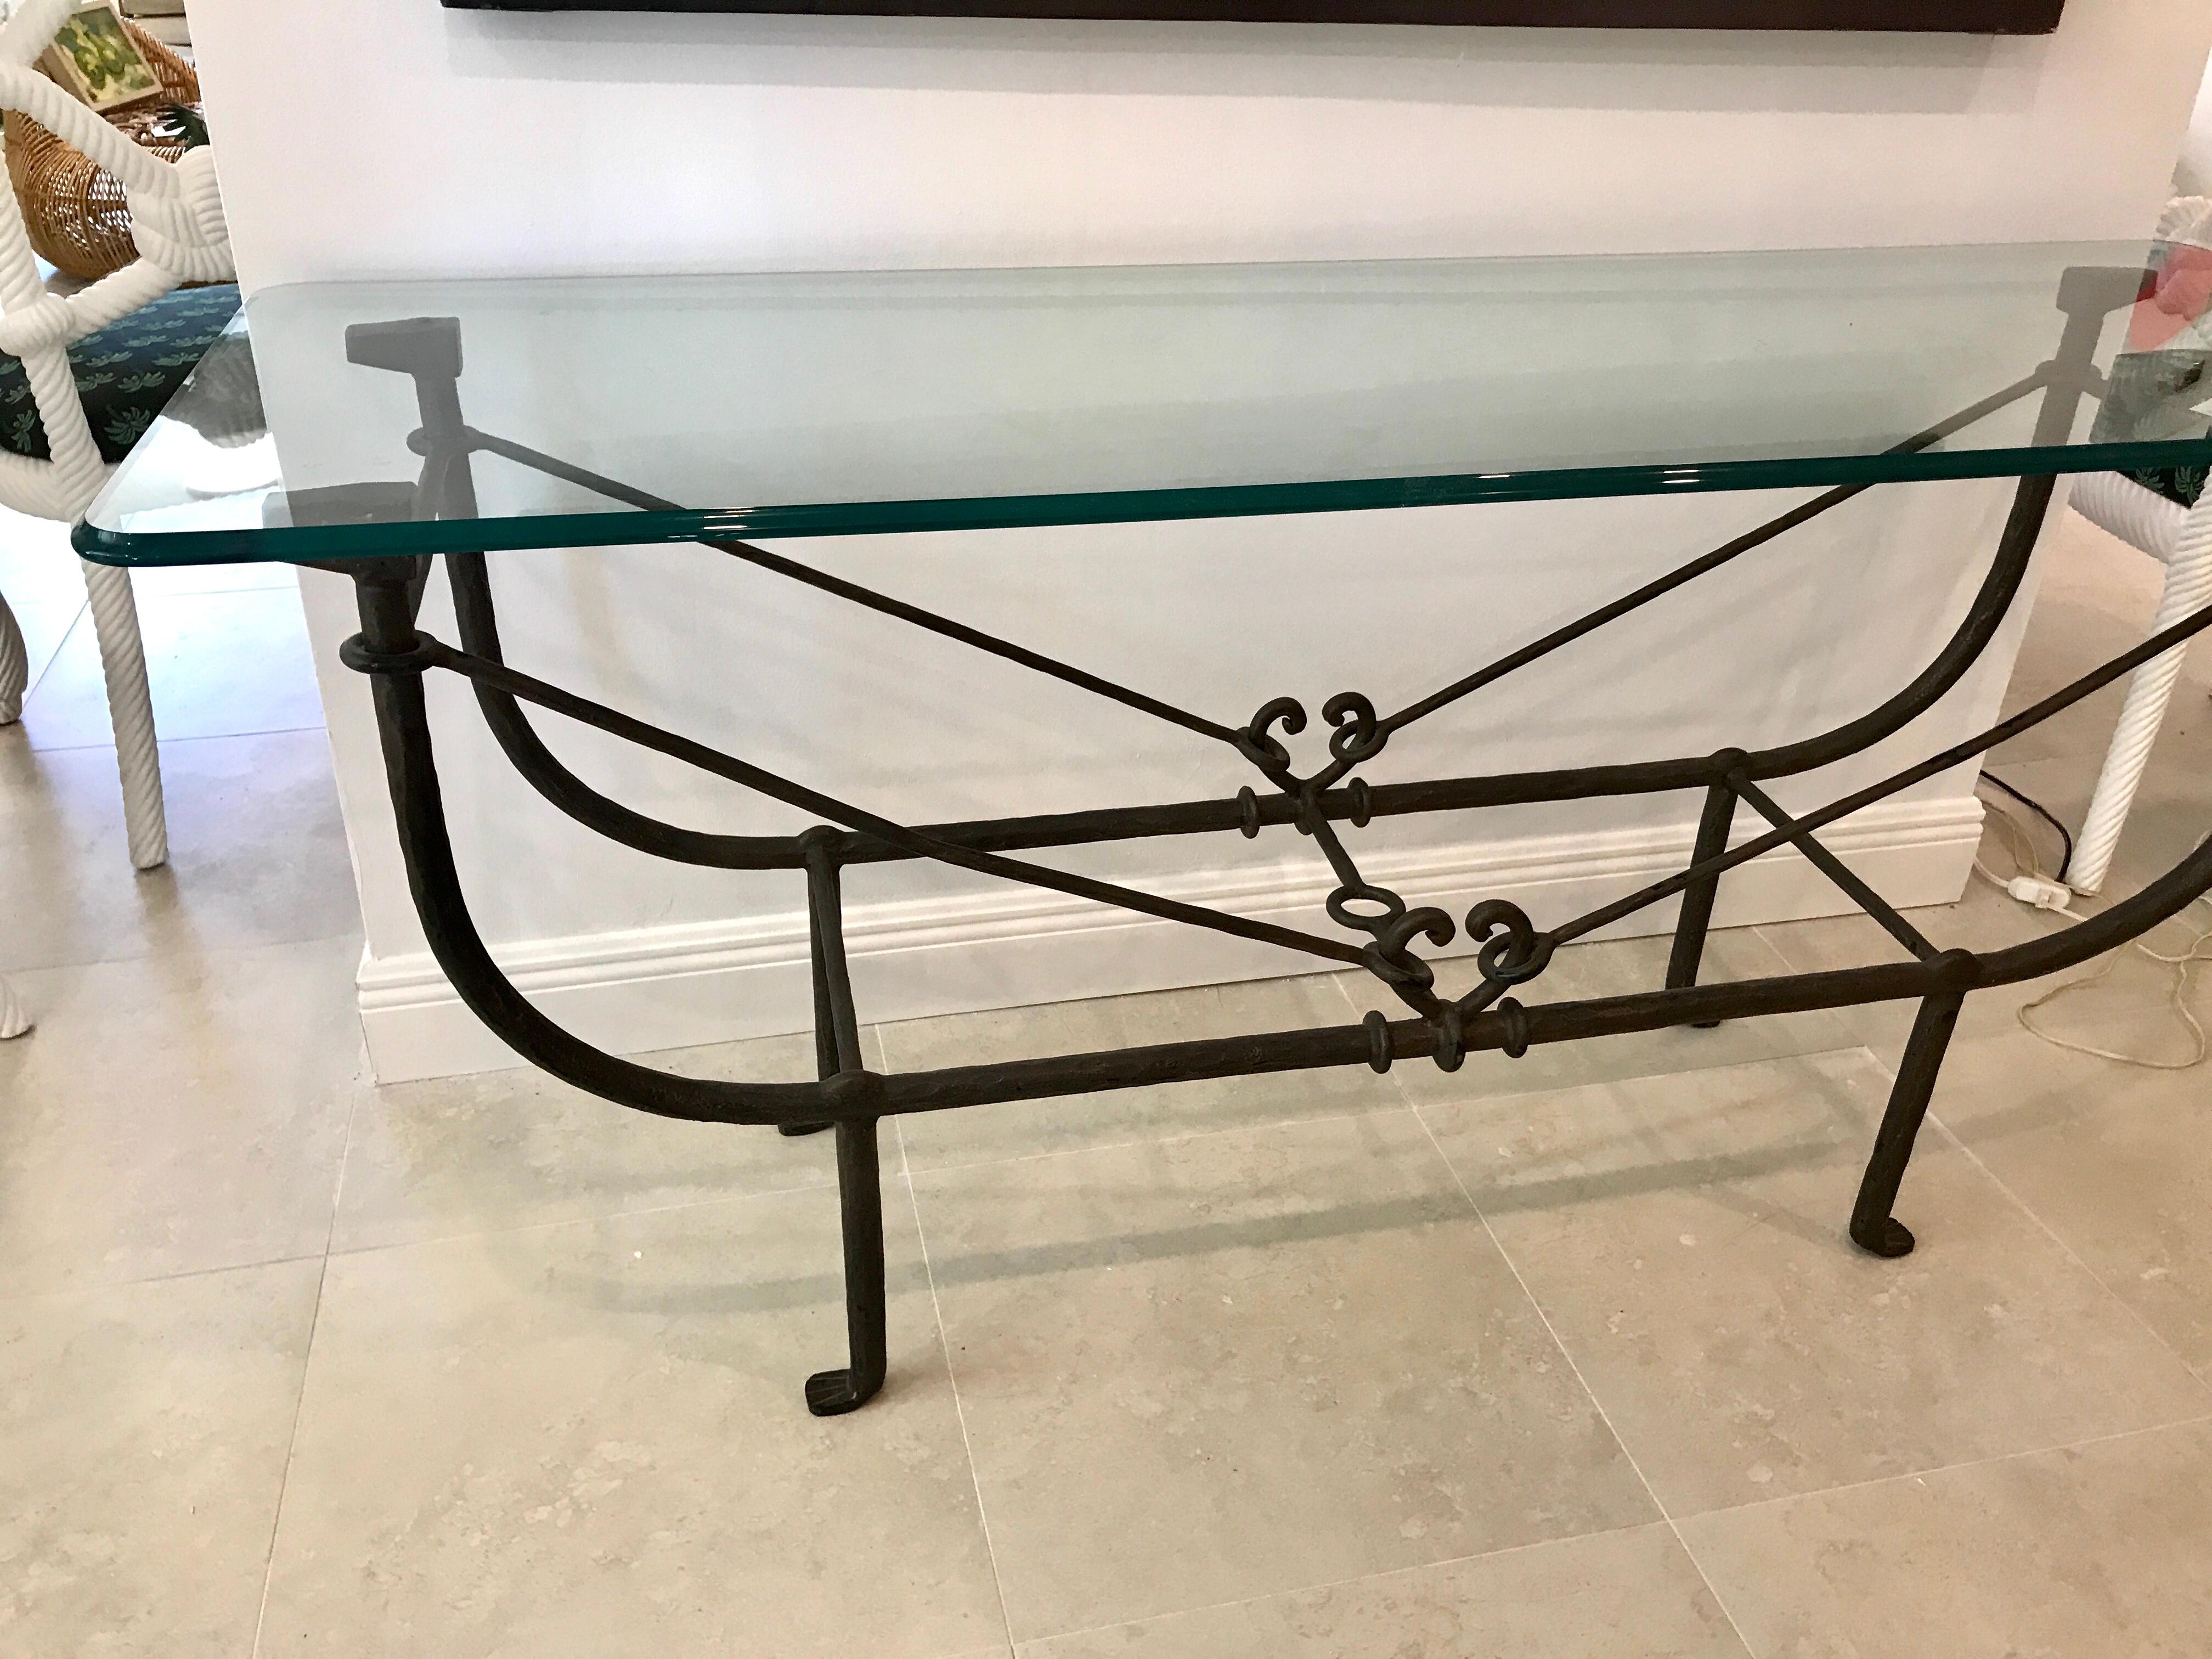 Sculptural iron table base in the style of Giacometti, can be used as a console or dining table base, shown with a glass top 67